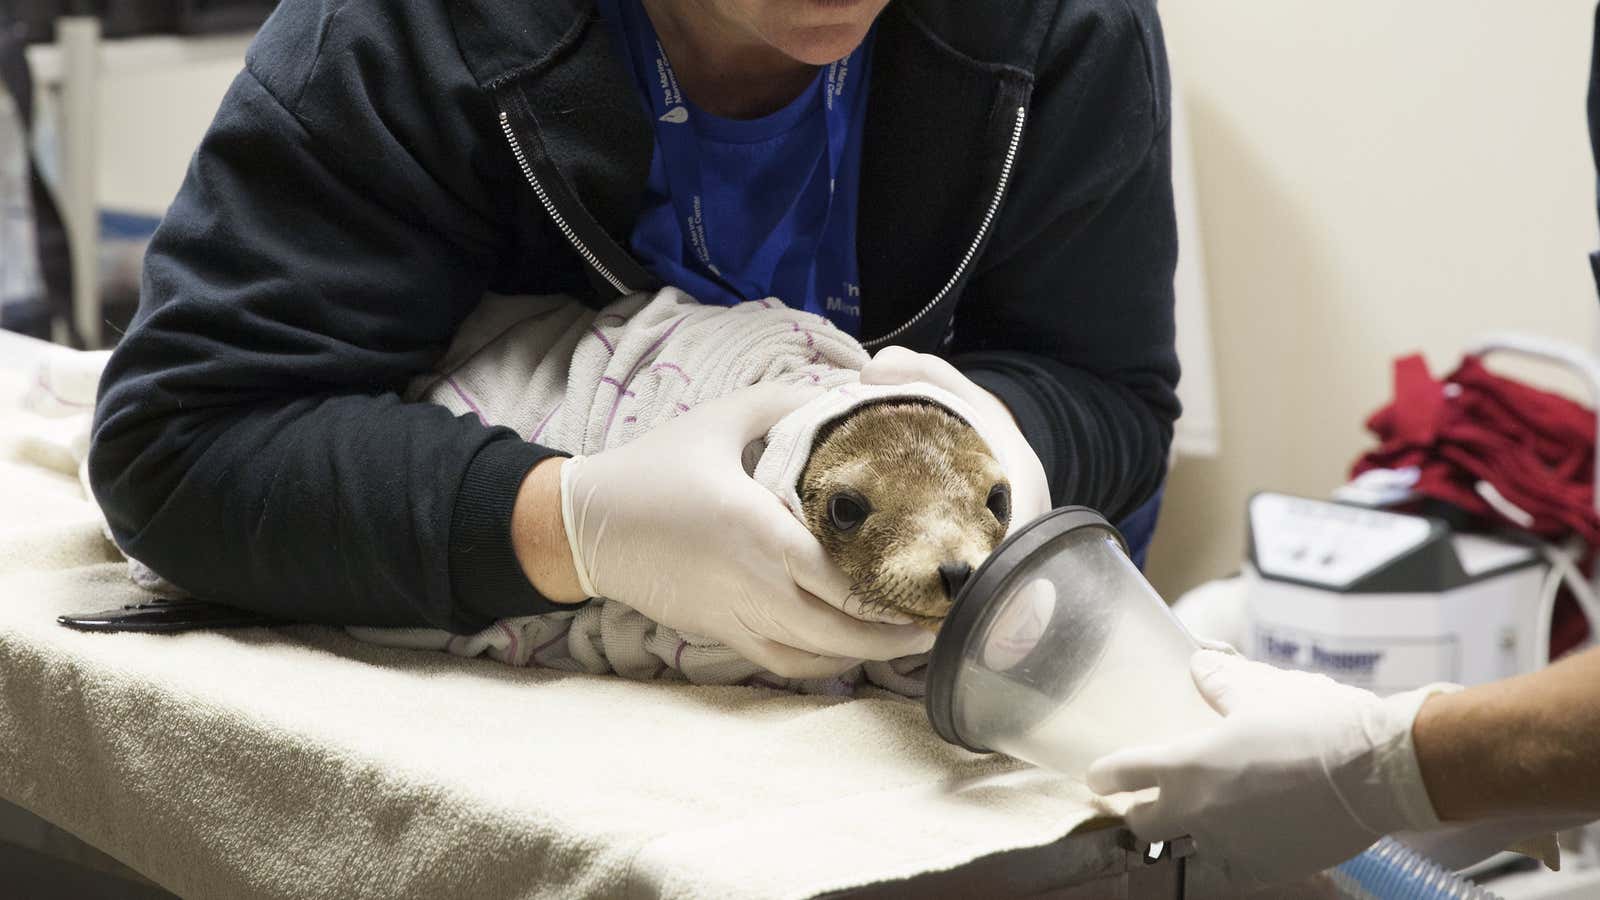 Staff veterinarians prepare to sedate a malnourished and dehydrated sea lion pup that had been found stranded along the northern California coast.